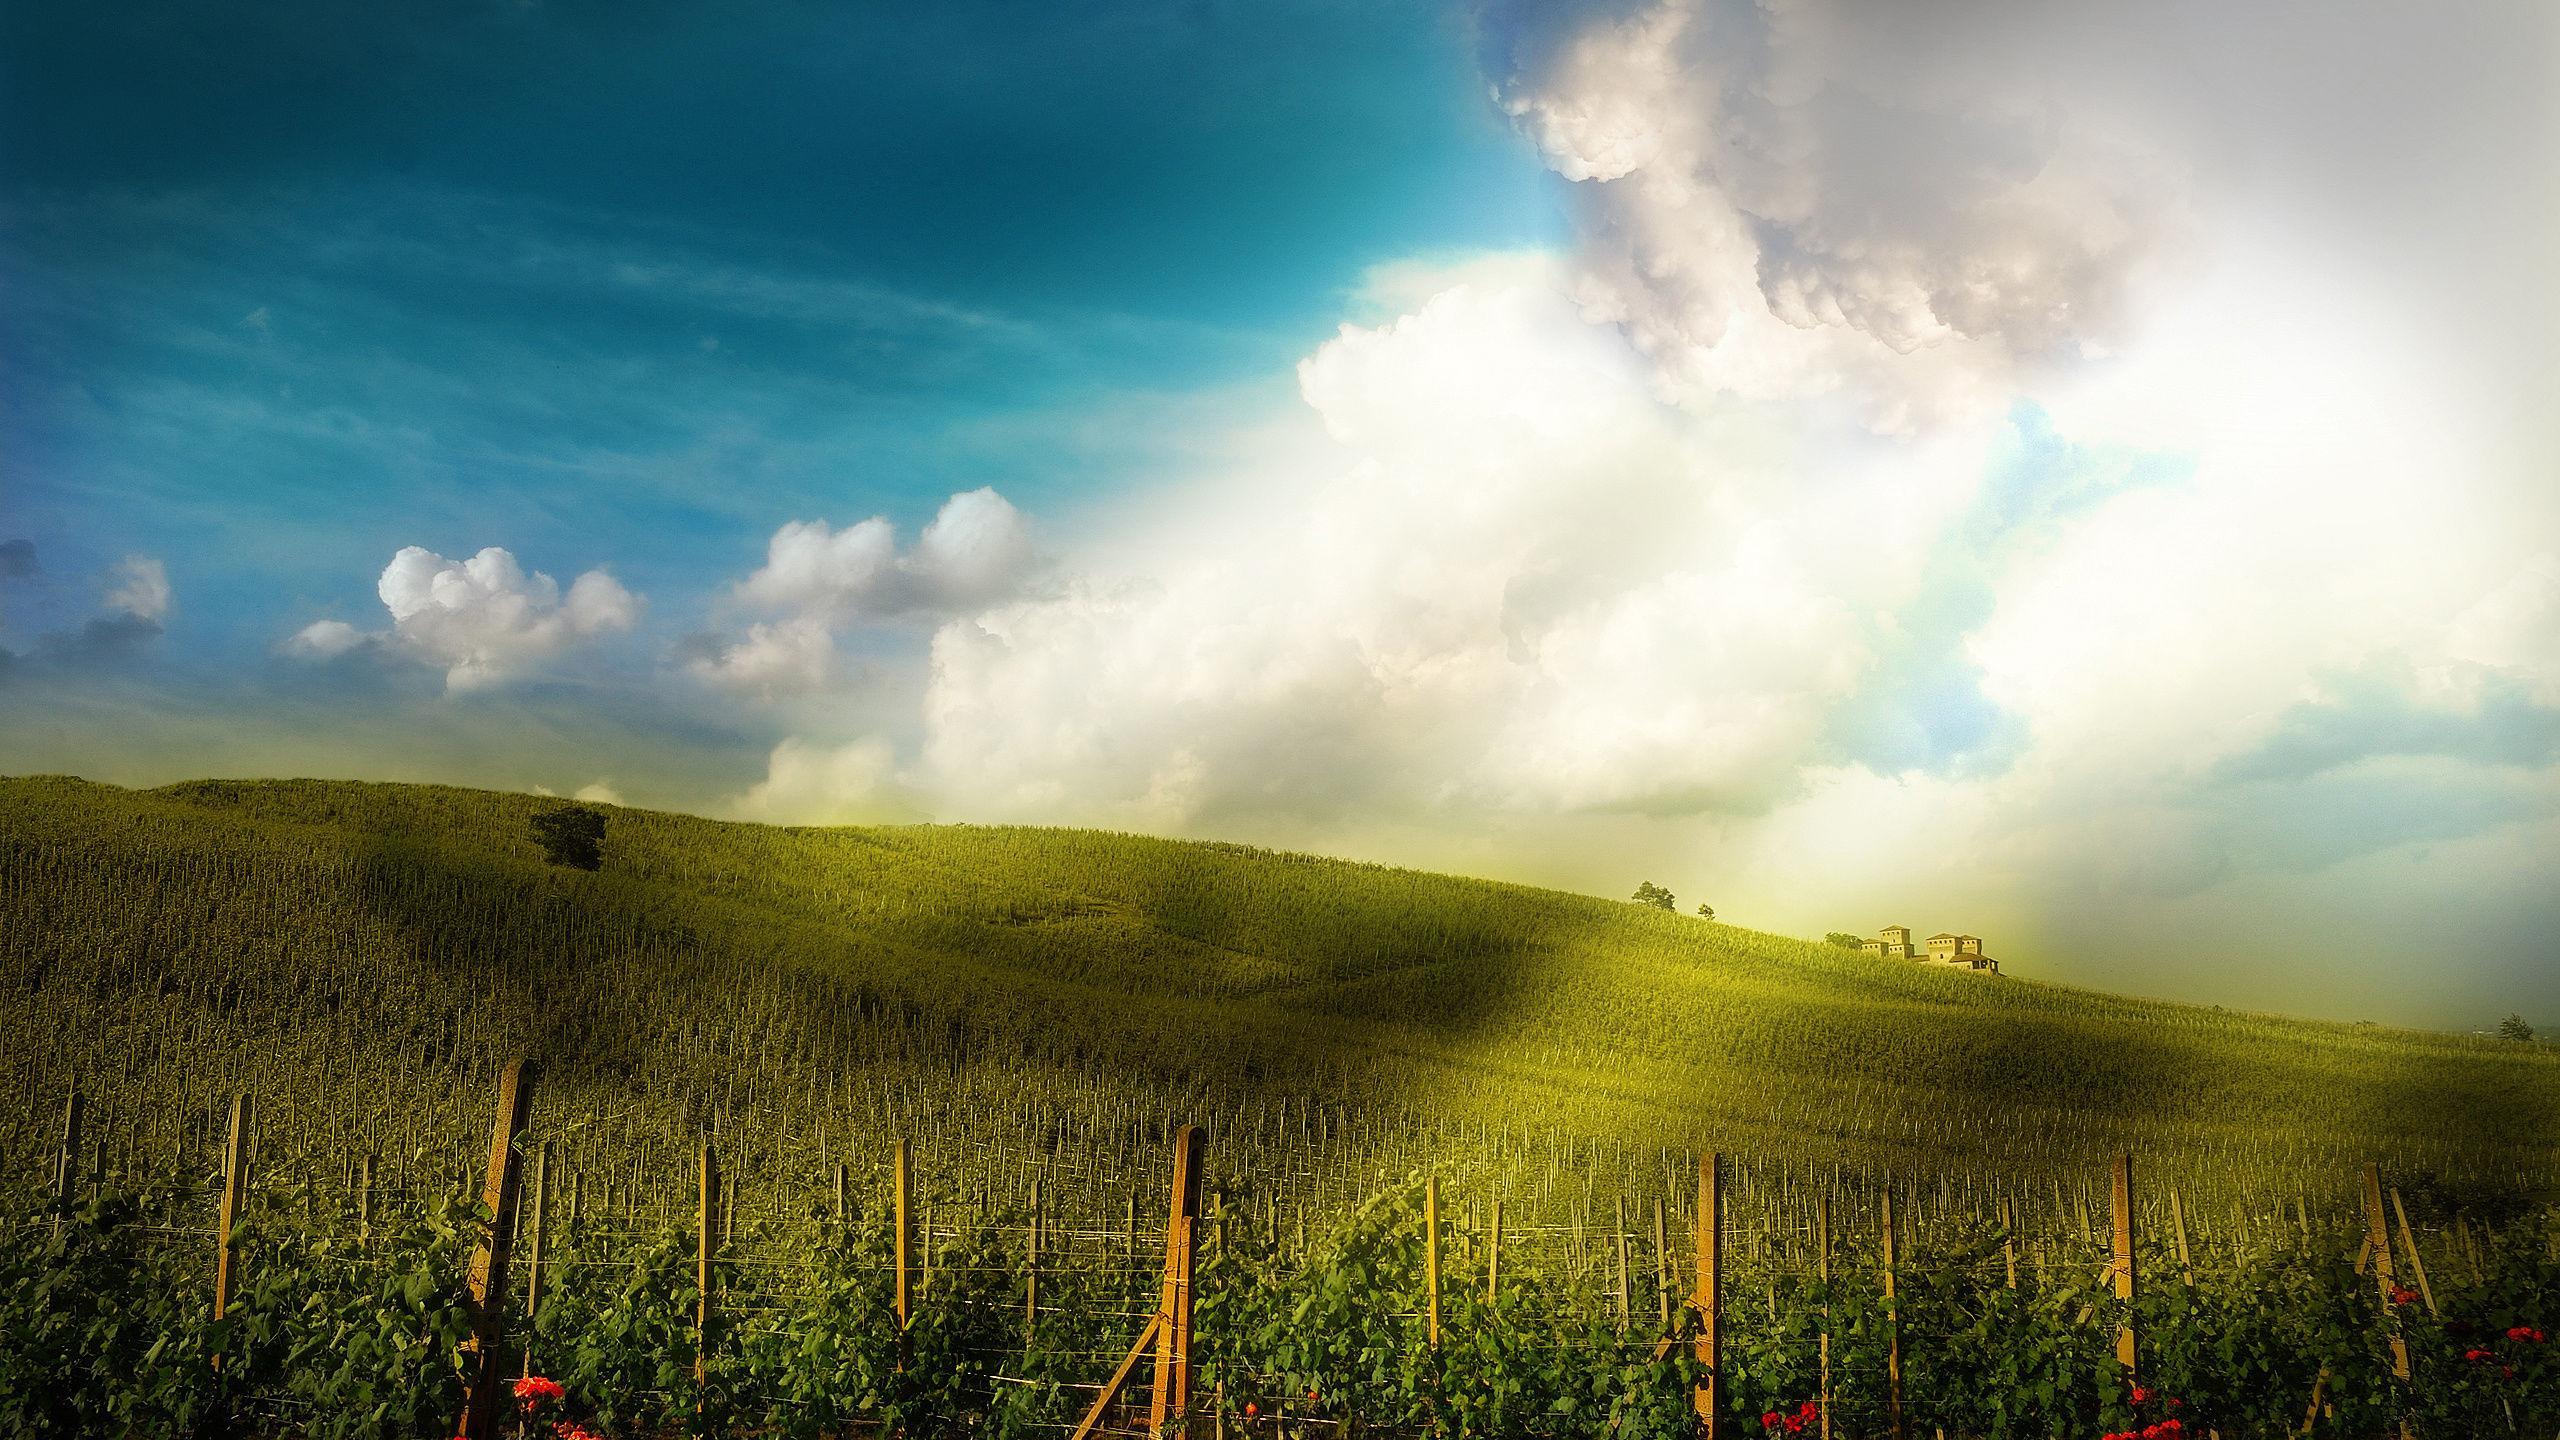 Image - My new Windows XP background ;) #windows #xp #background #hd #cover #wallpaper - Post 422